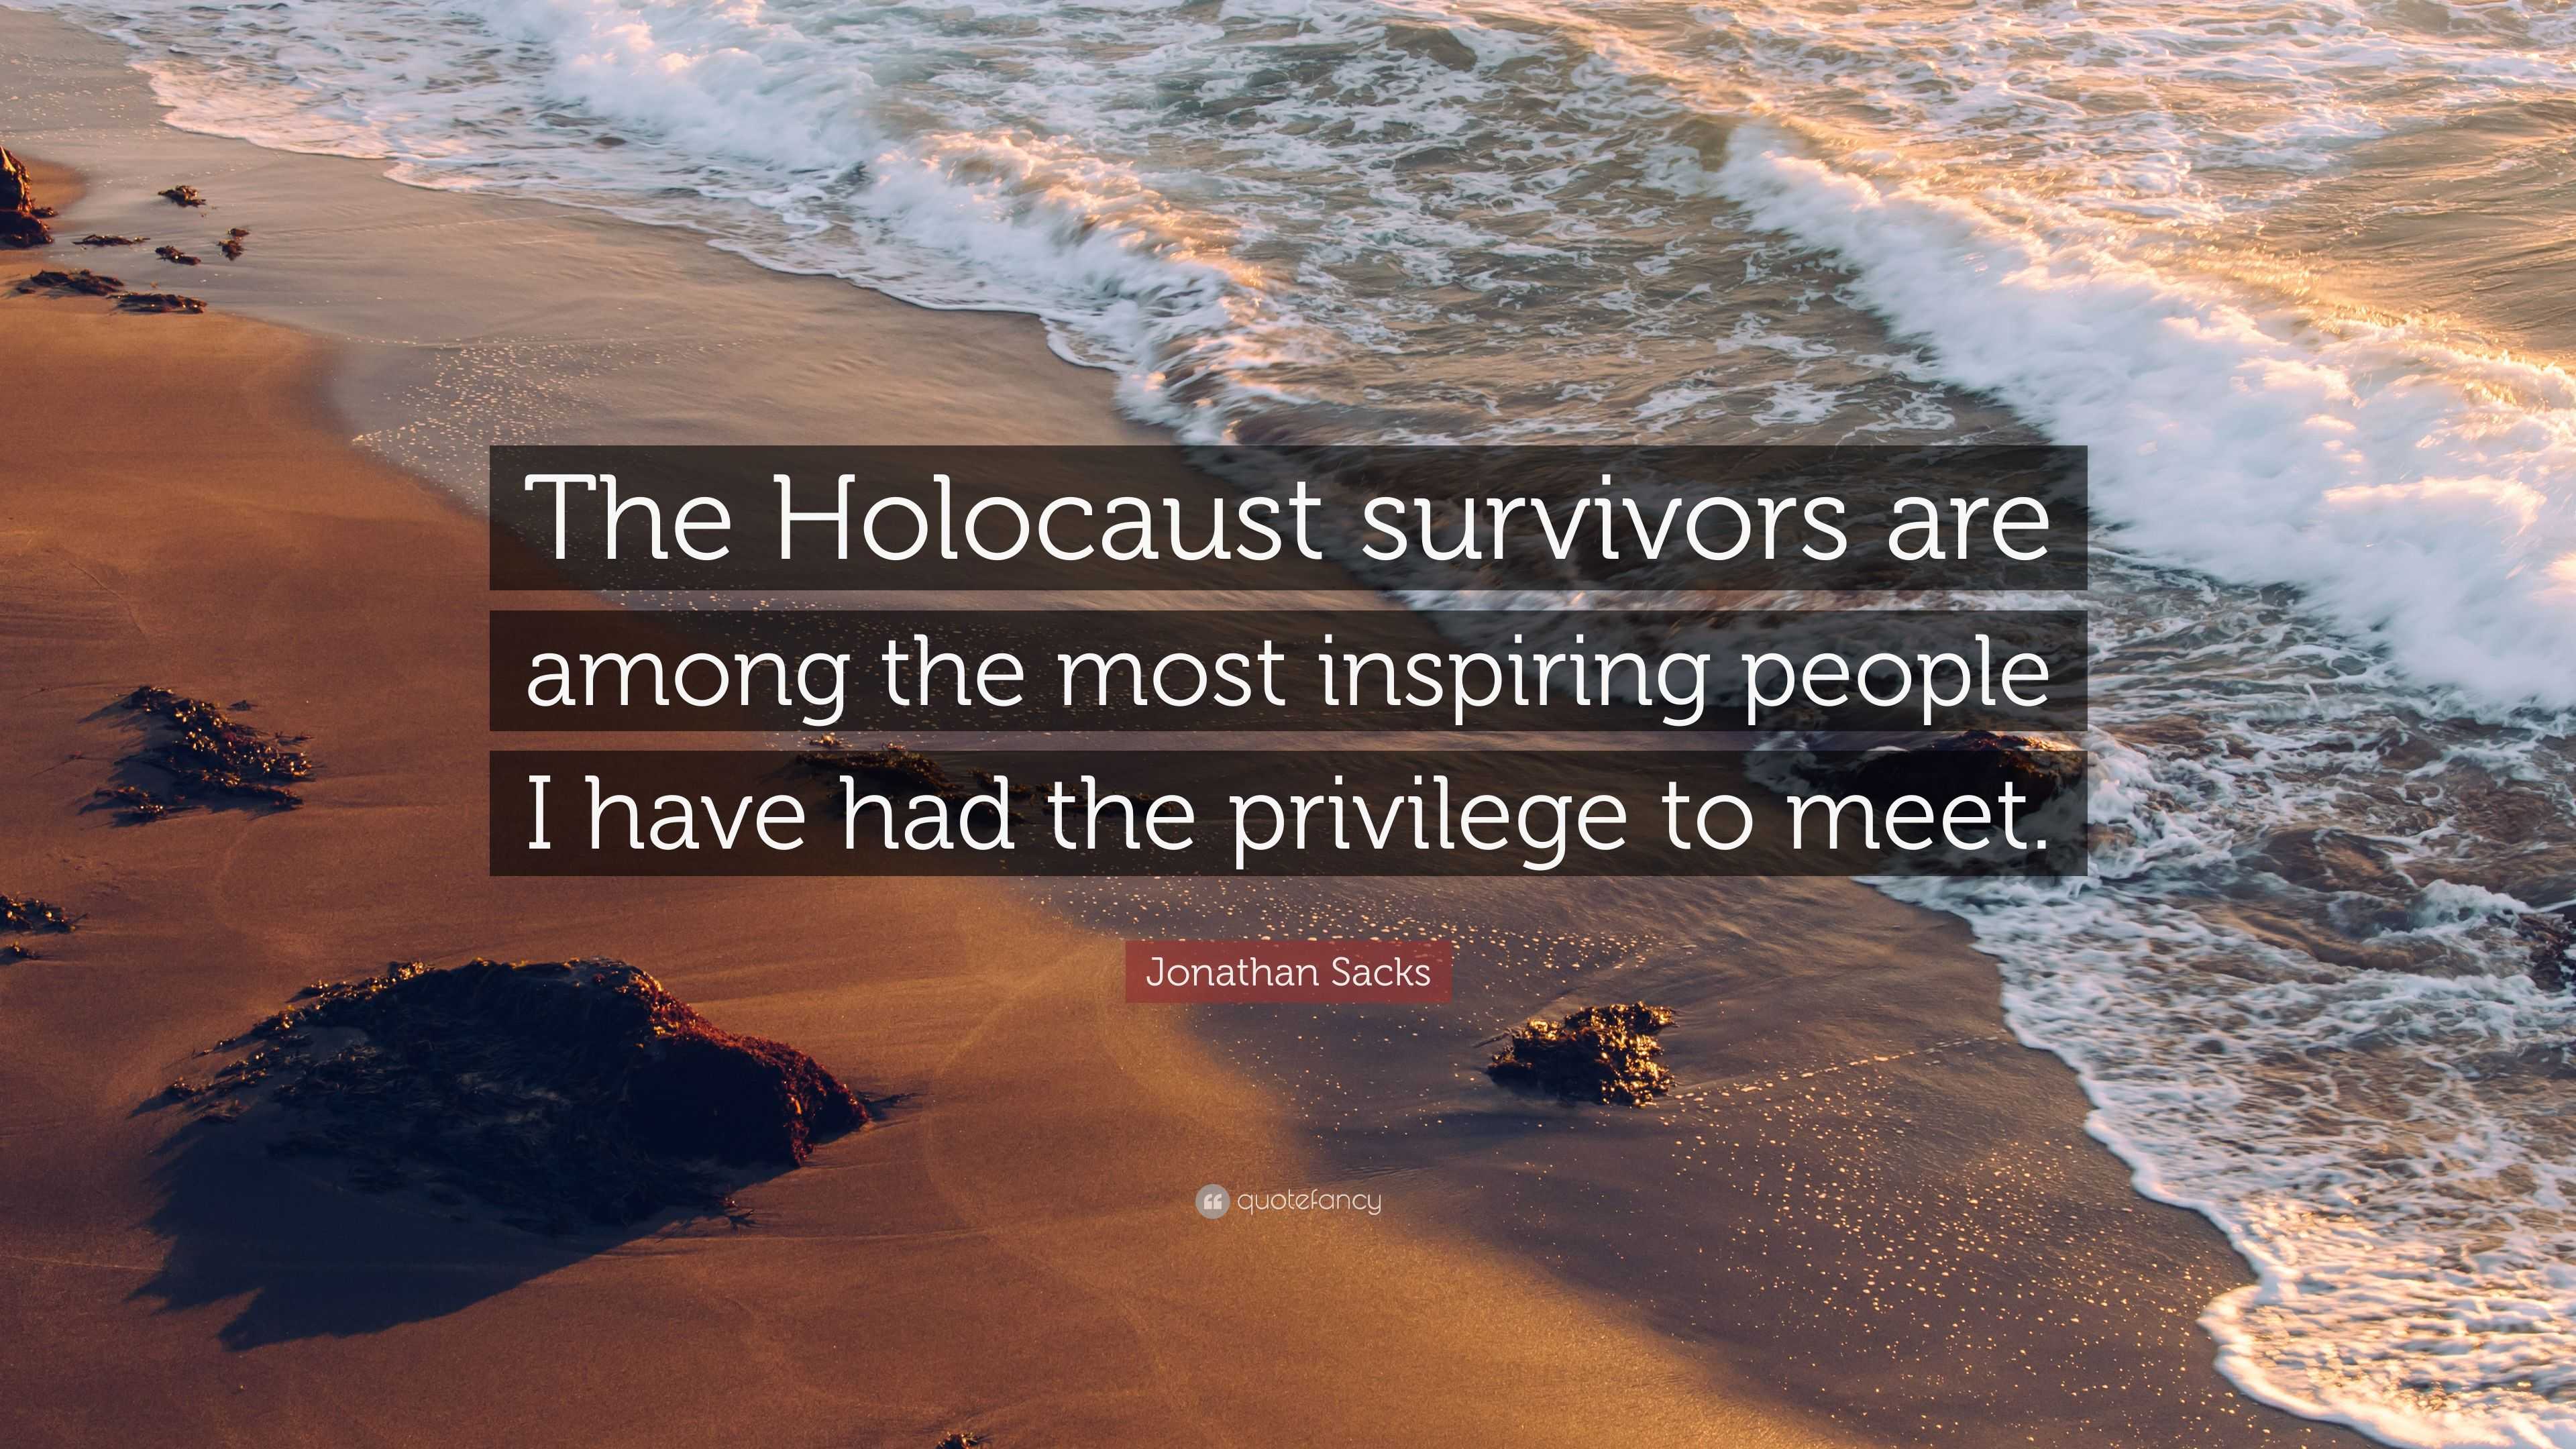 Jonathan Sacks Quote “The Holocaust survivors are among the most